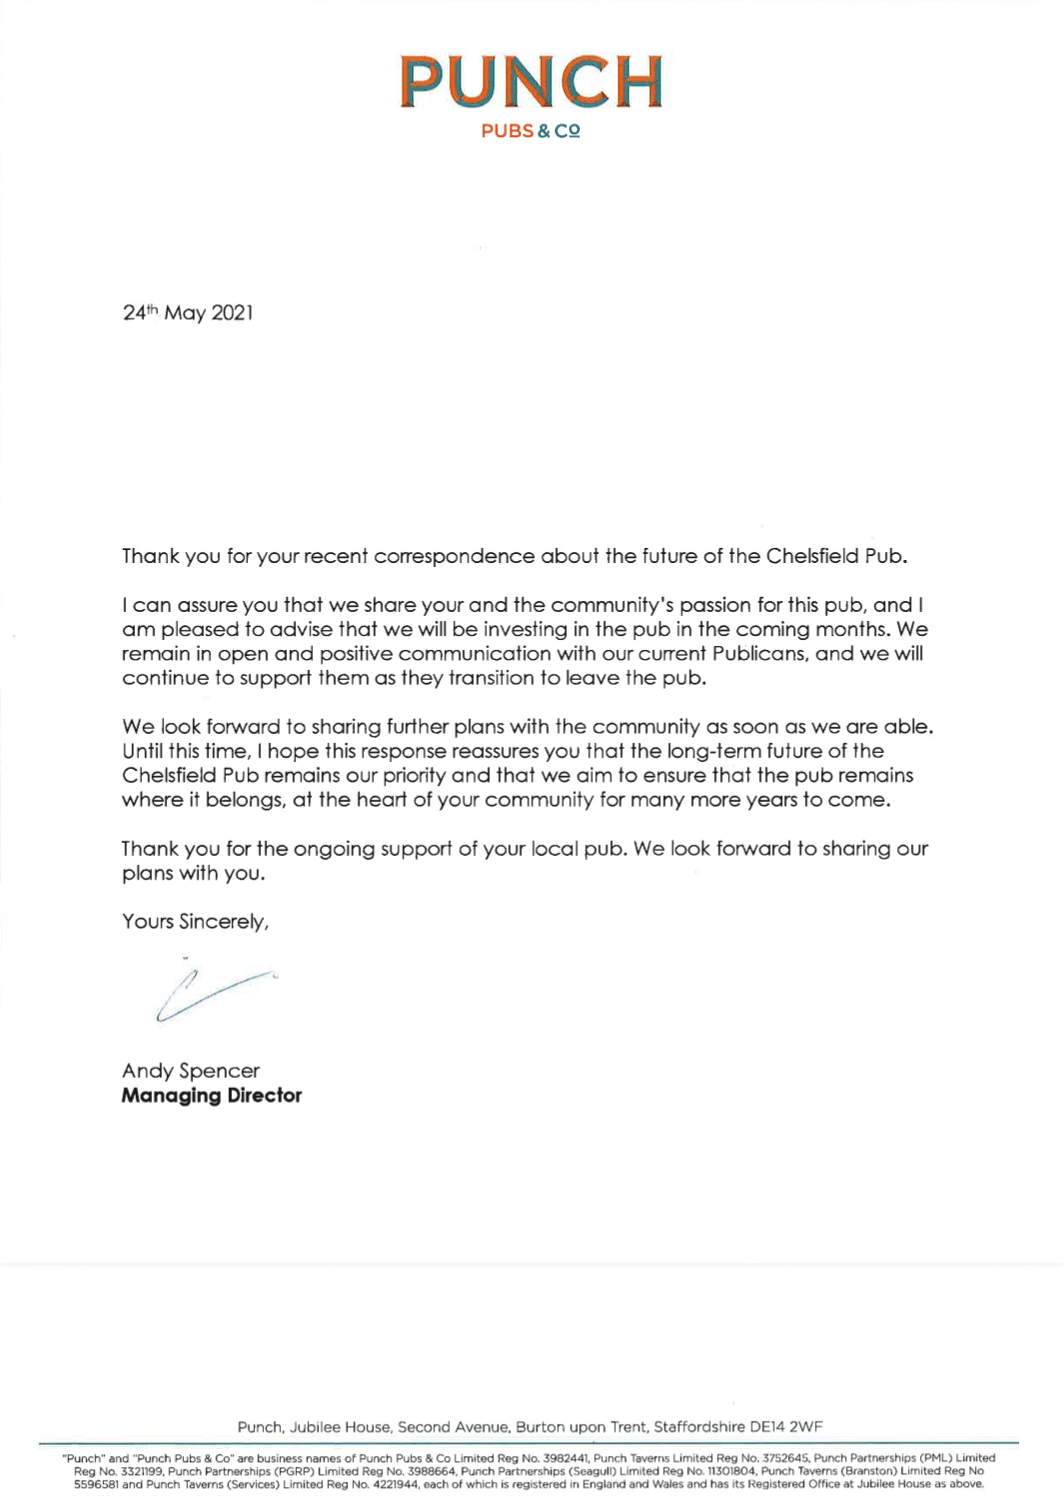 A statement from Andy Spencer, Managing Director of Punch Pubs